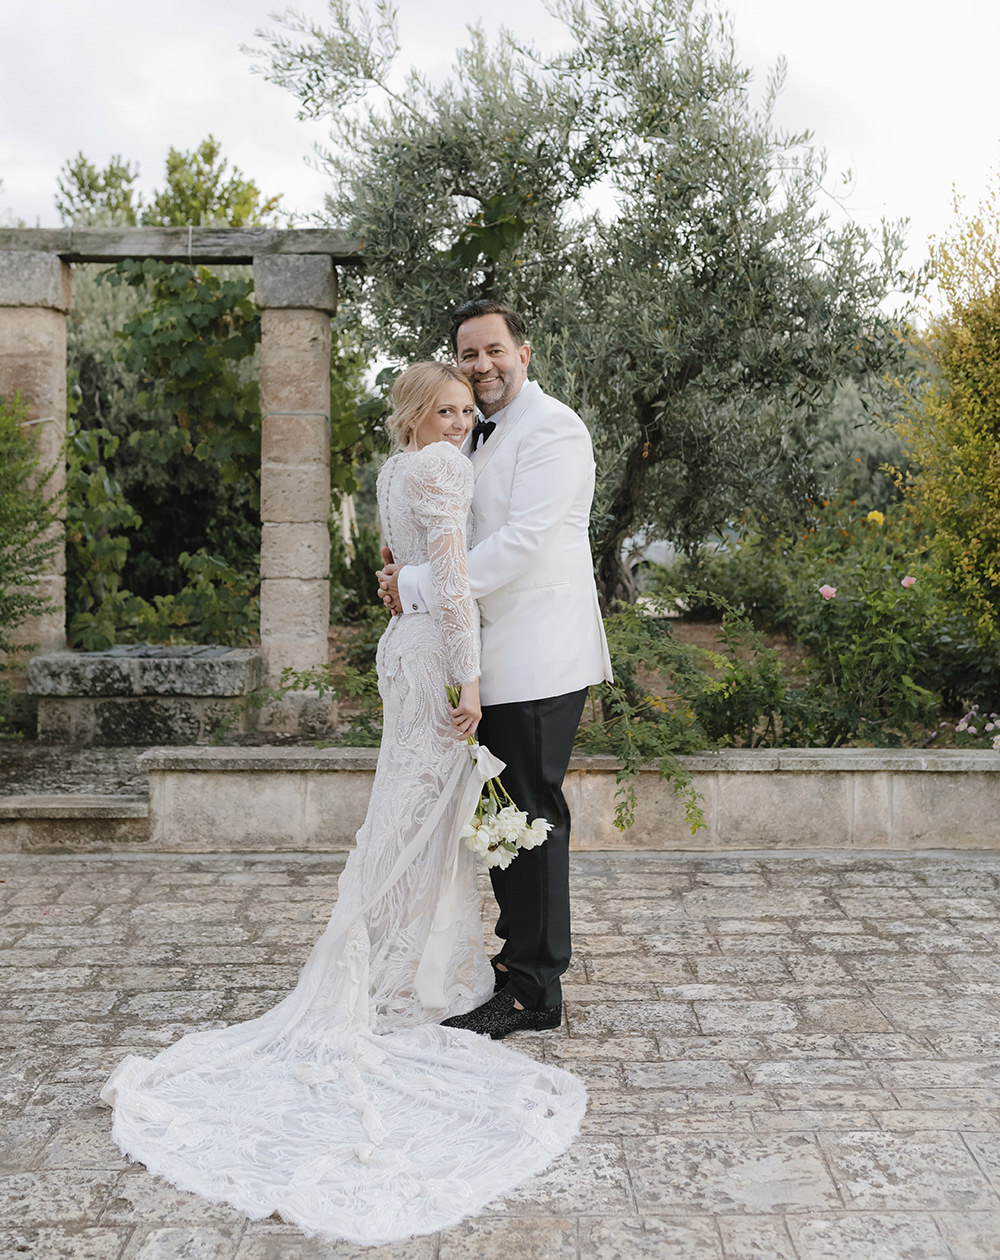 Destination Weddings in the Puglia region of southern Italy